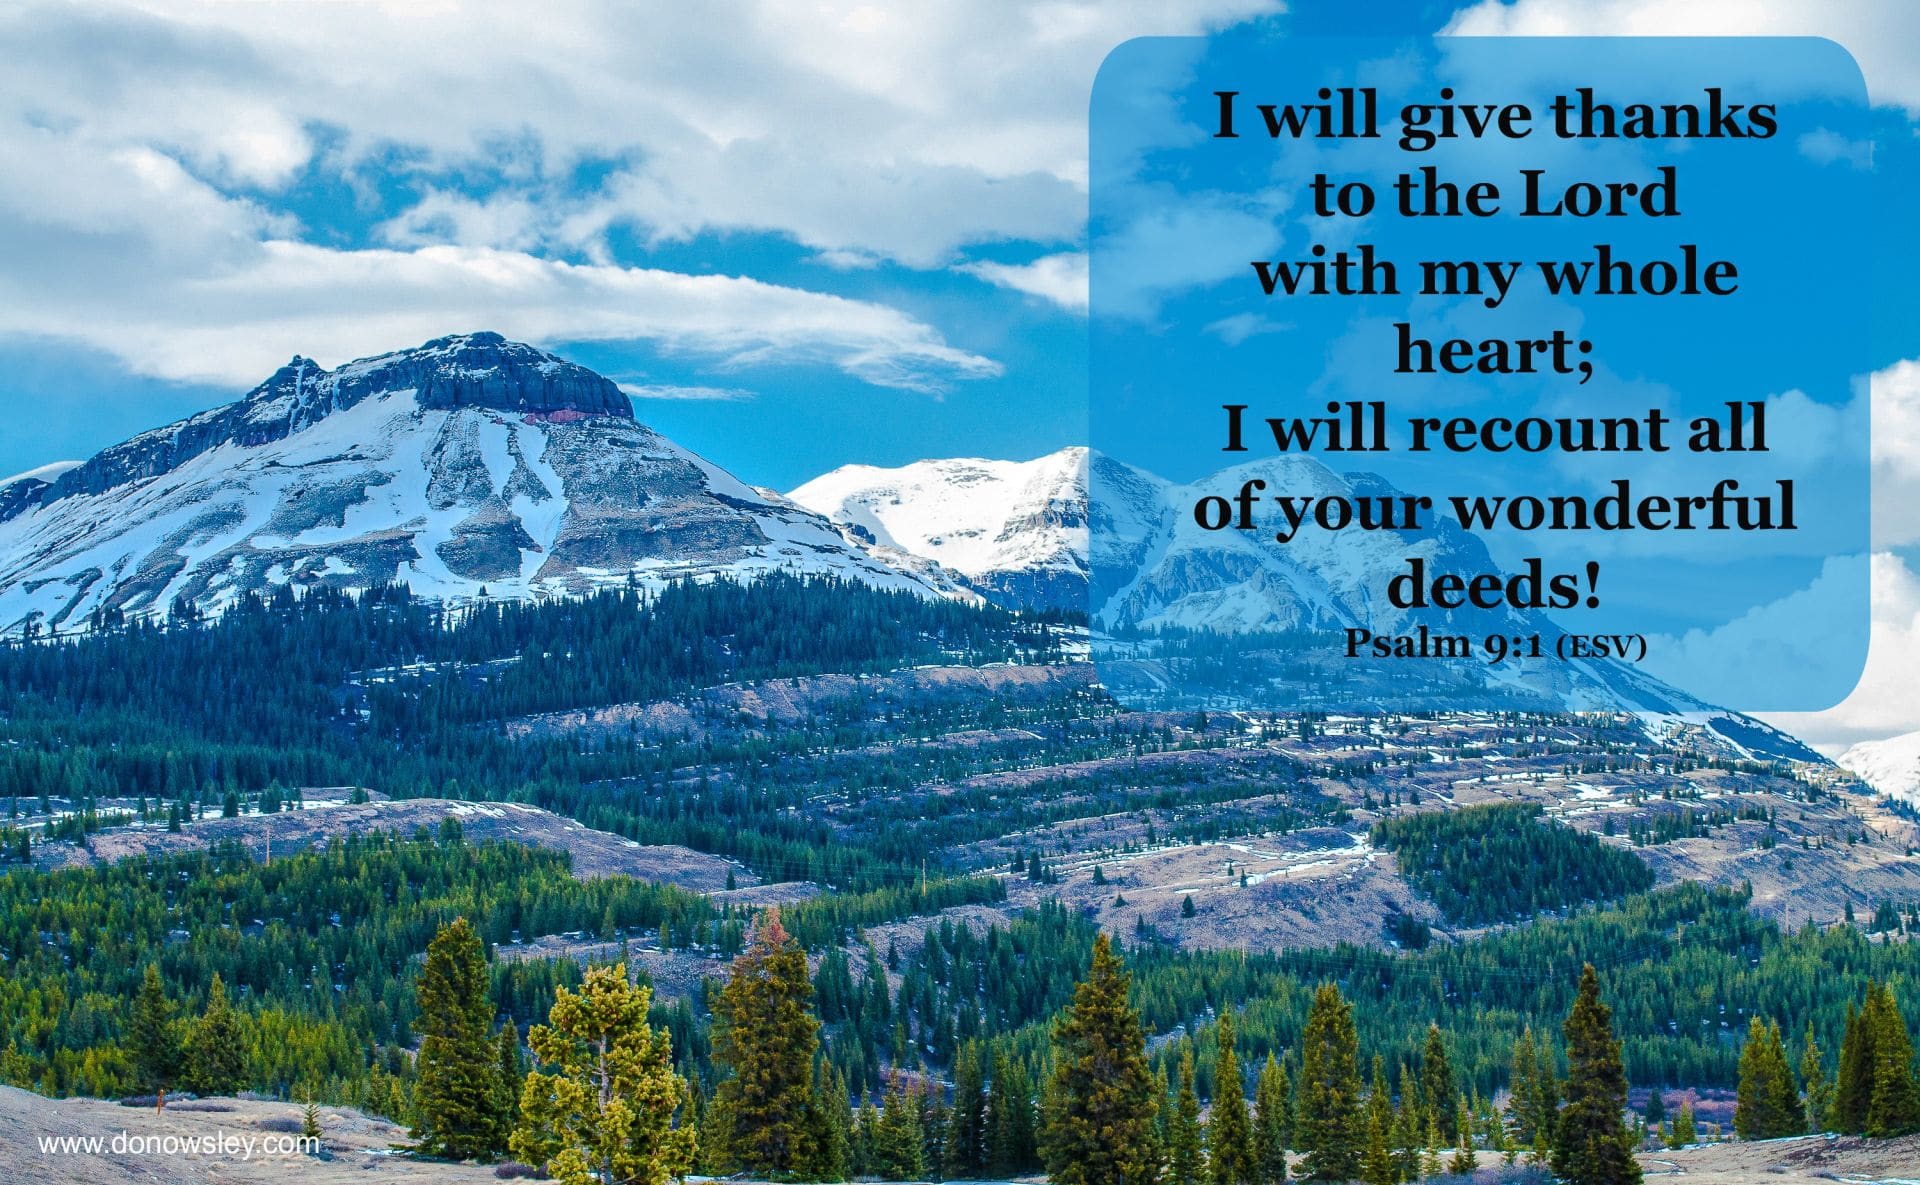 I will give thanks to the Lord with my whole heart; I will recount all your wonderful deeds.